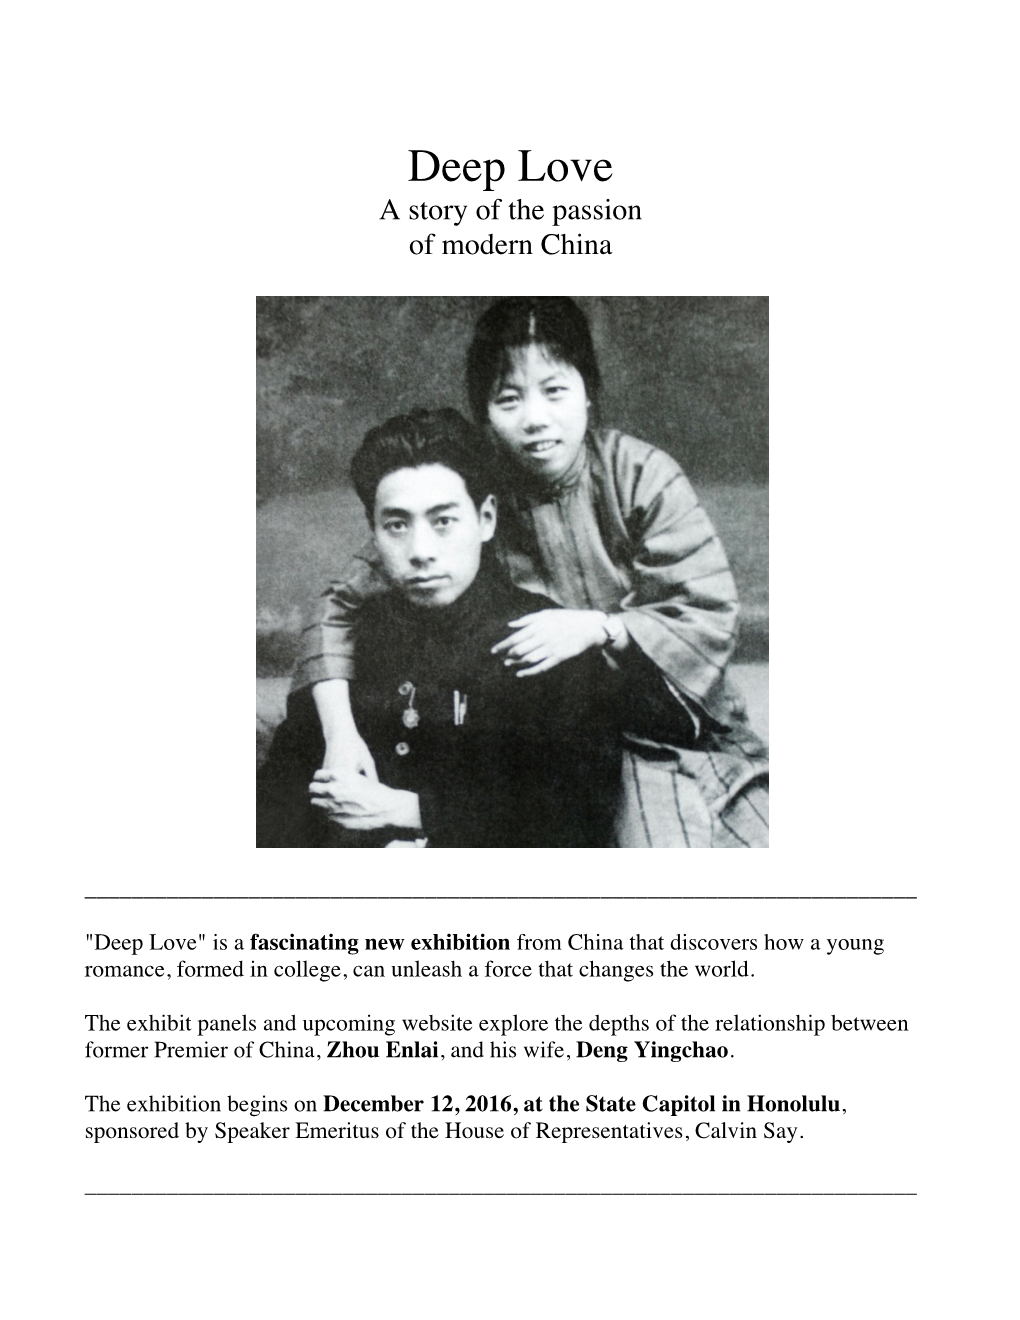 Deep Love a Story of the Passion of Modern China